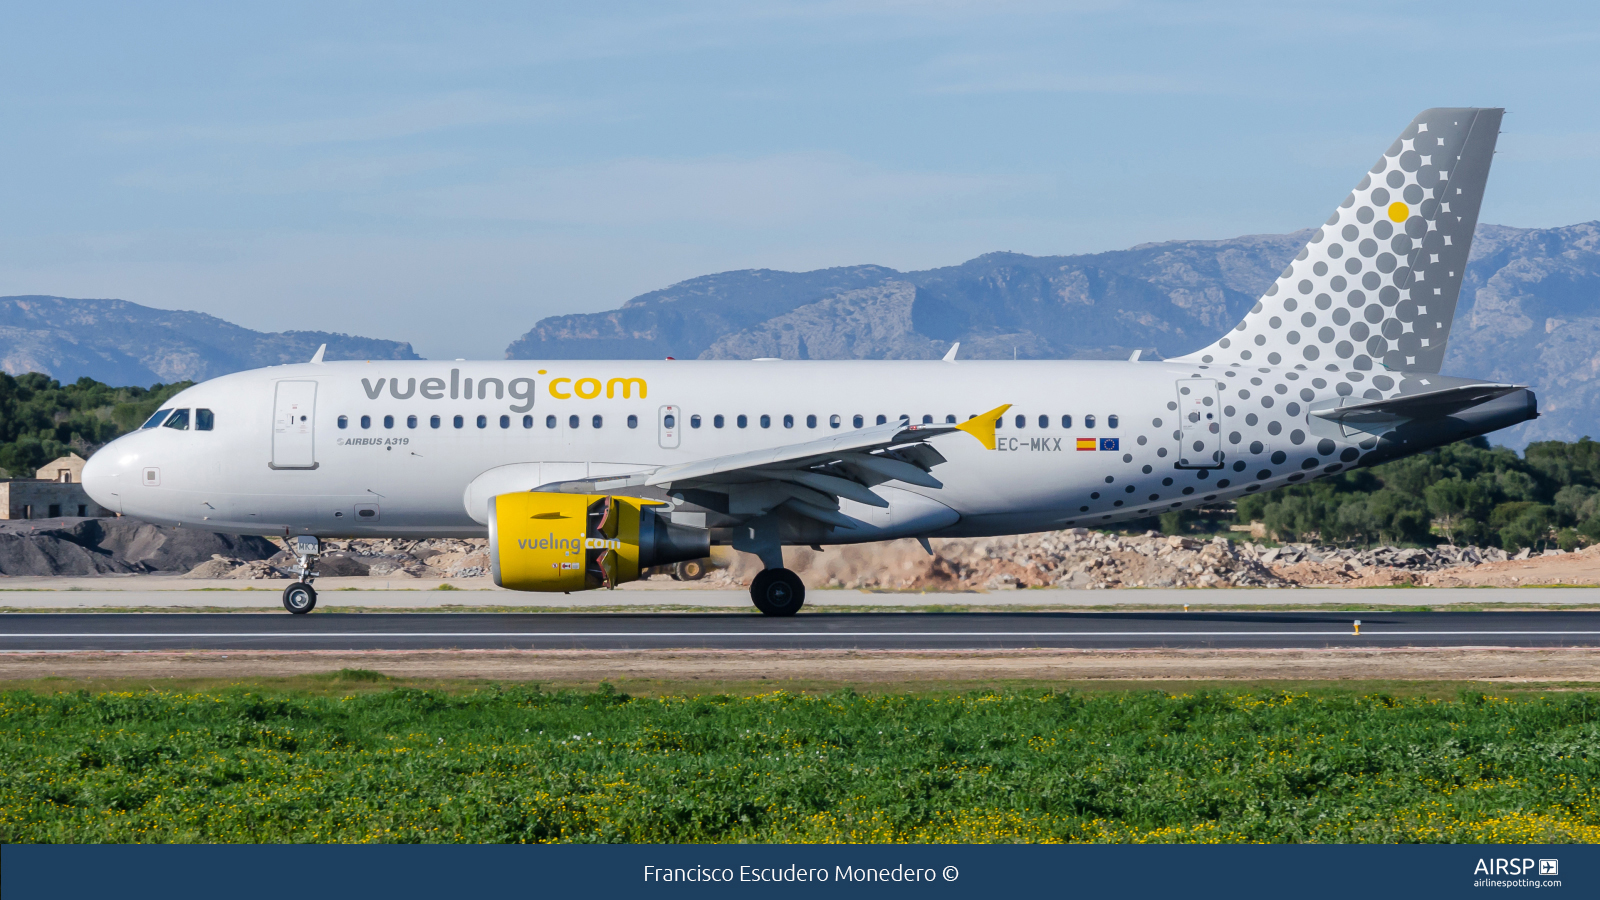 Vueling  Airbus A319  EC-MKX